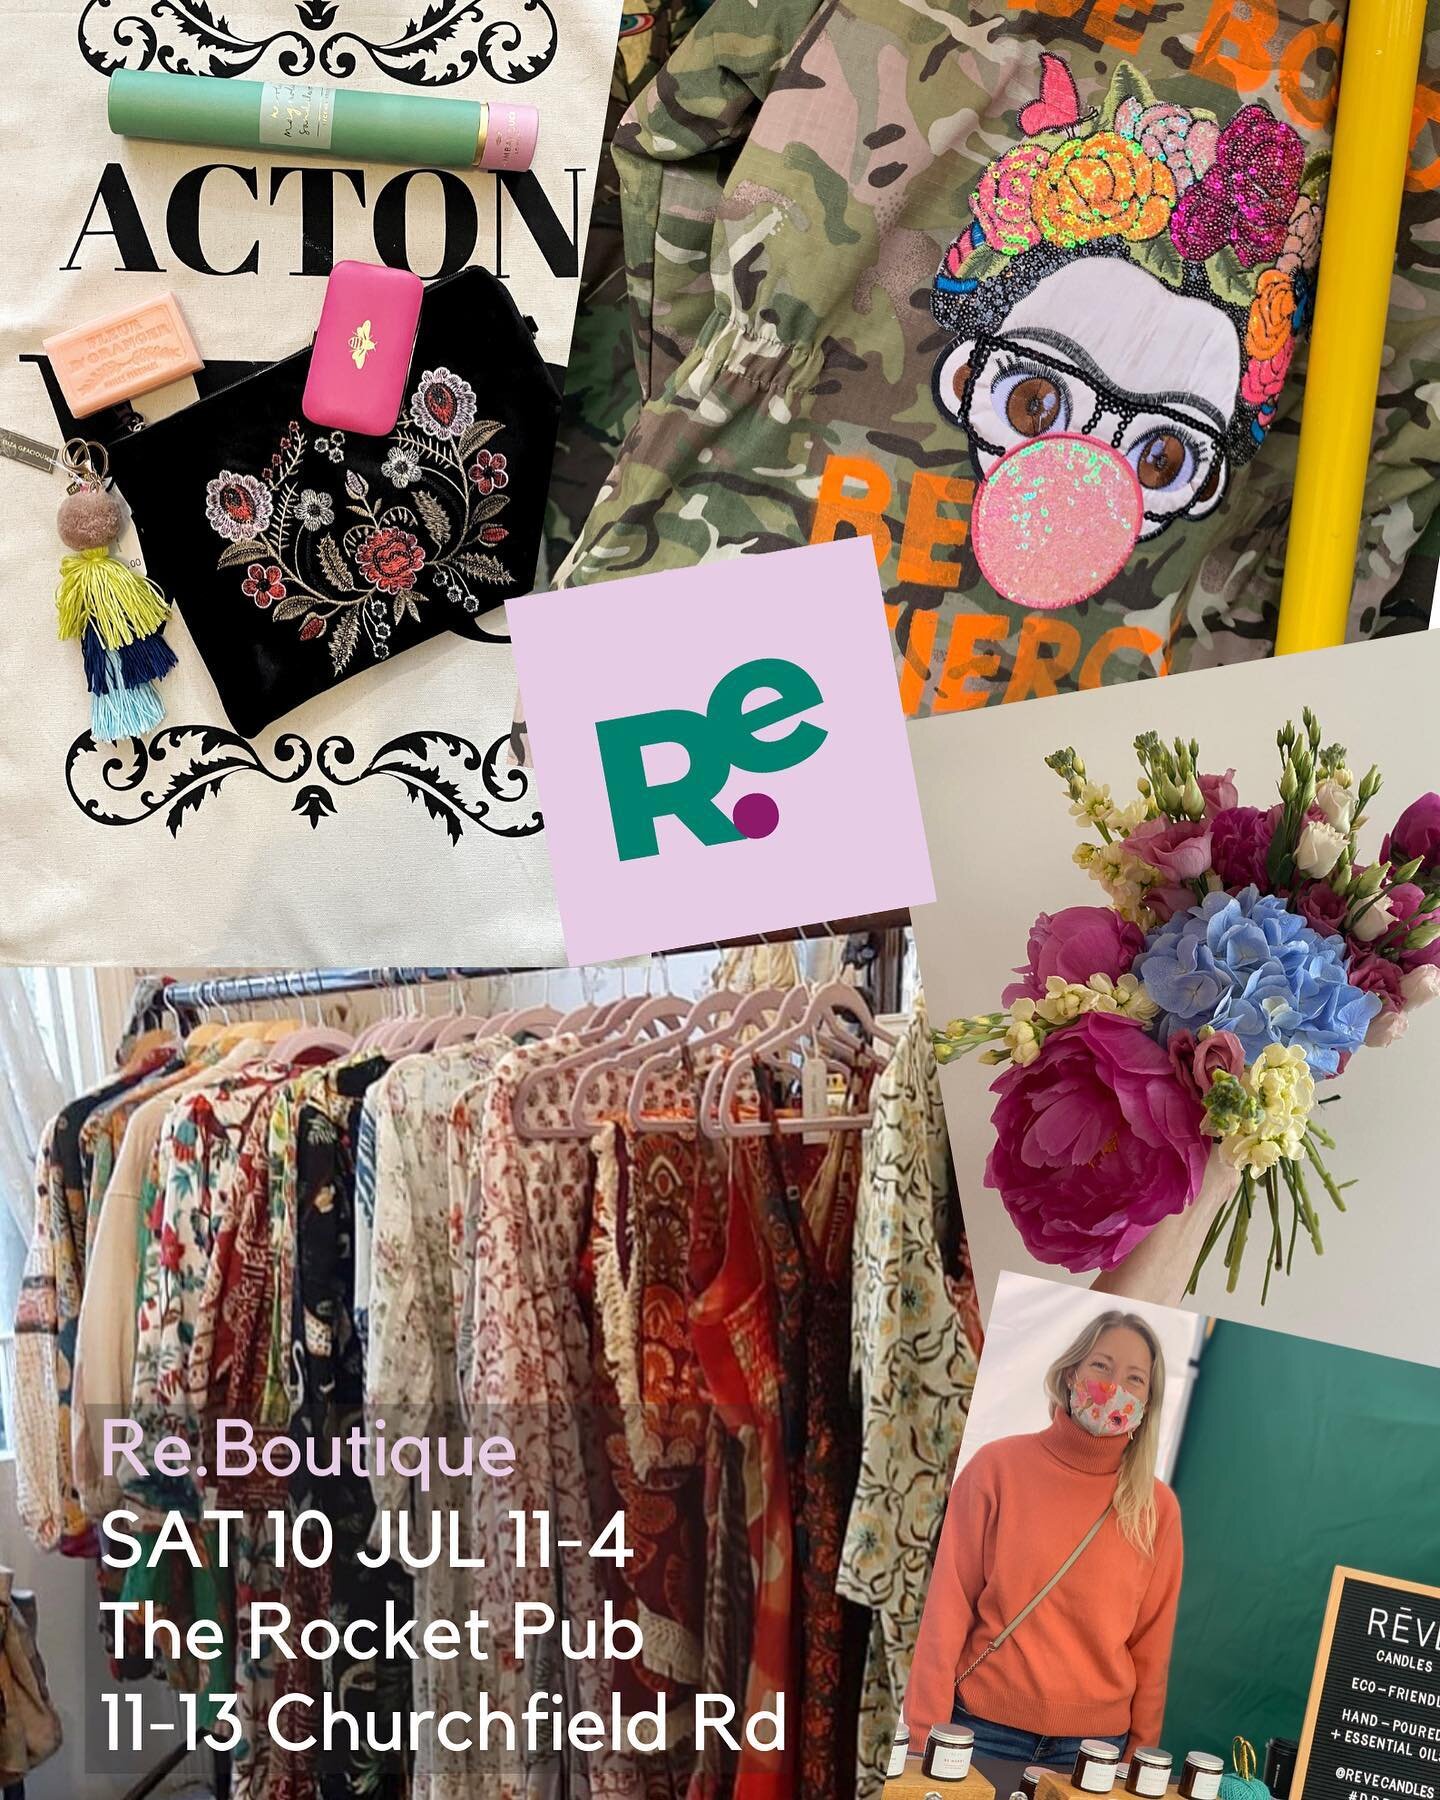 Tomorrow see&rsquo;s the launch of @reboutique.co.uk a new monthly pop up at @therocketacton that will see a rotation of traders selling everything from preloved and vintage fashion to fresh flowers and up-cycled homewares. Head down to browse the ed